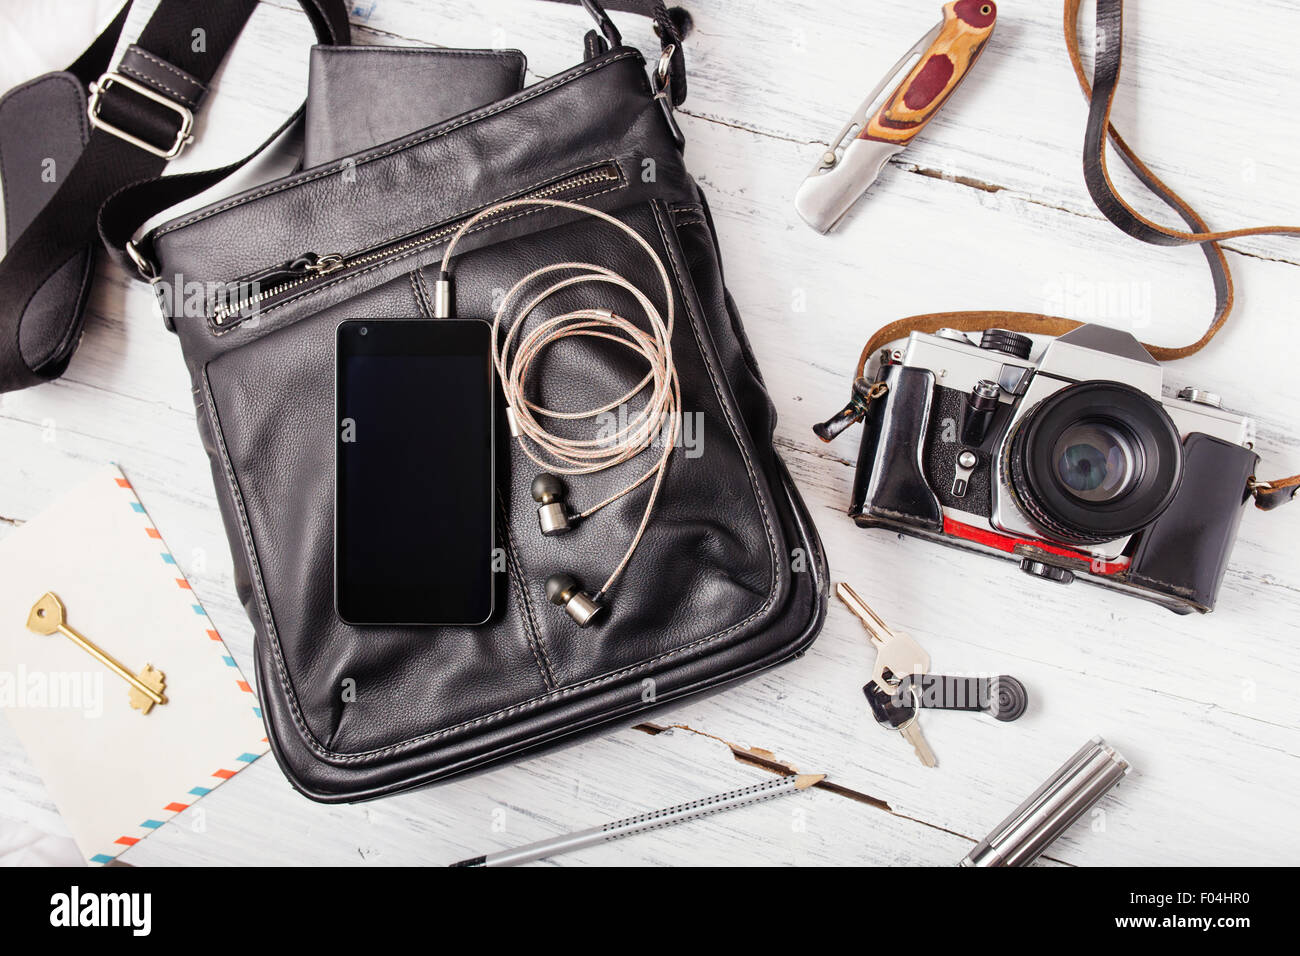 Objects on wooden background: leather bag, camera, smartphone, keys, knife. Outfit of young man. Stock Photo